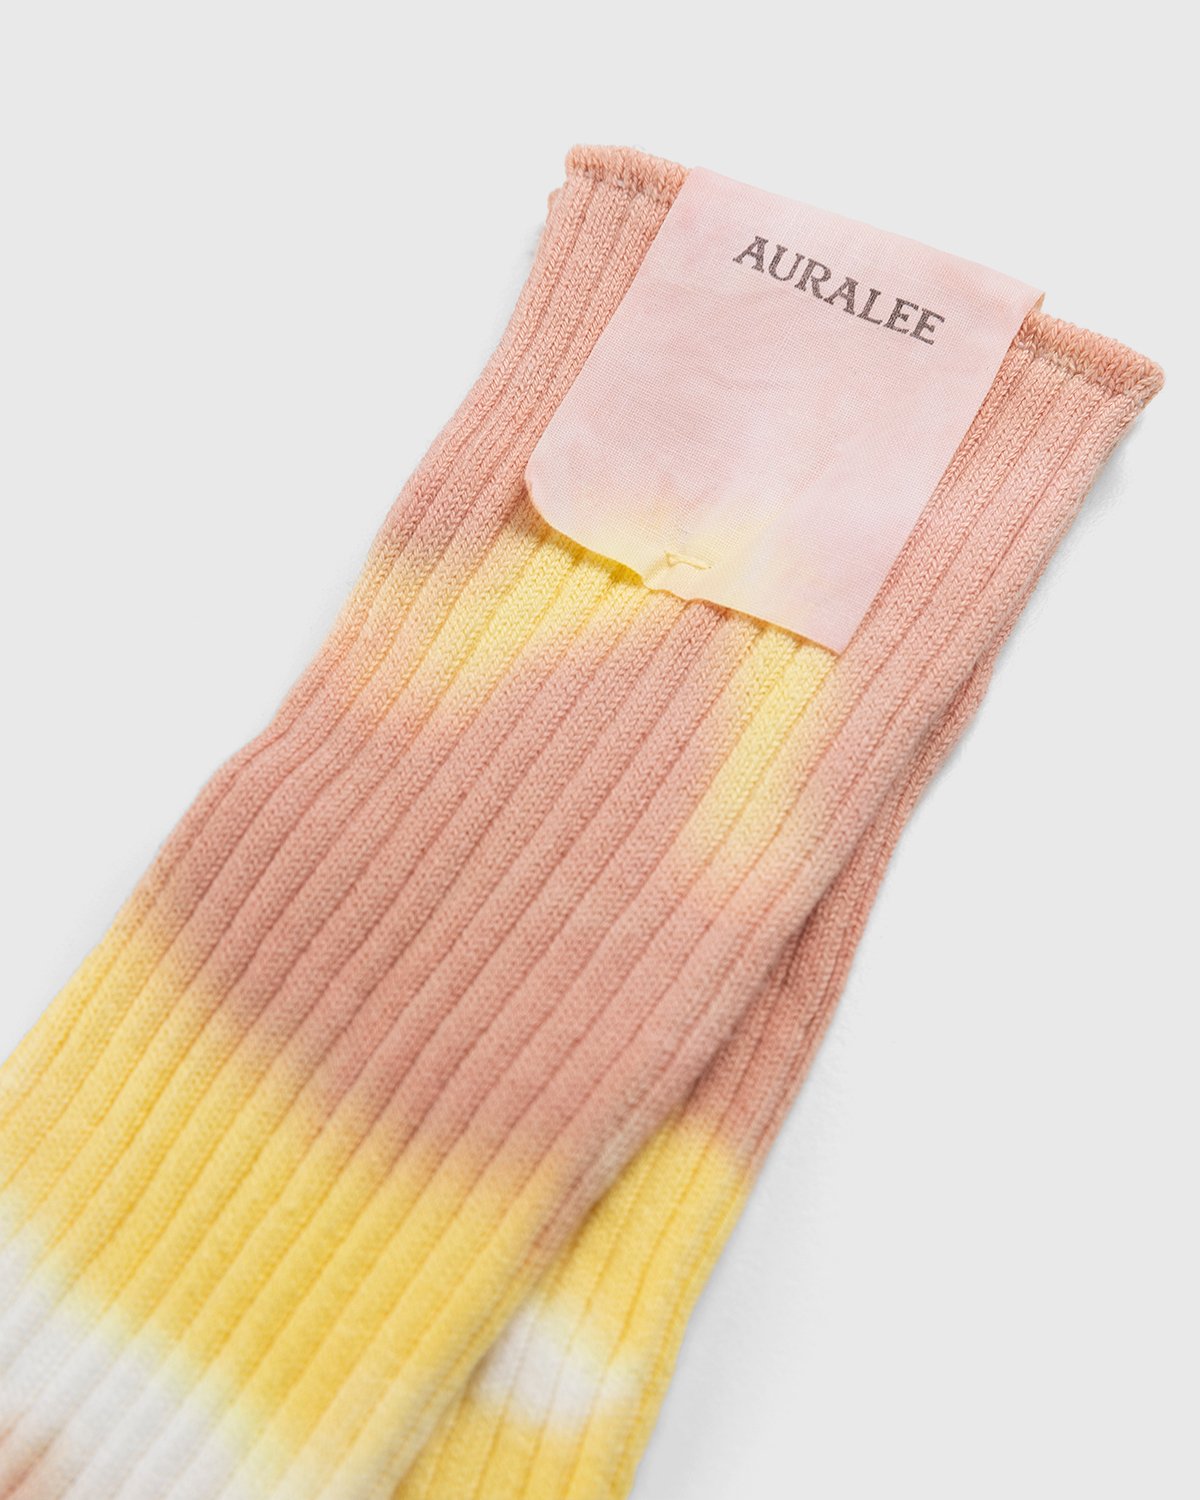 Auralee - Giza Cotton Dyed Socks PINK YELLOW DYE - Accessories - Pink - Image 2